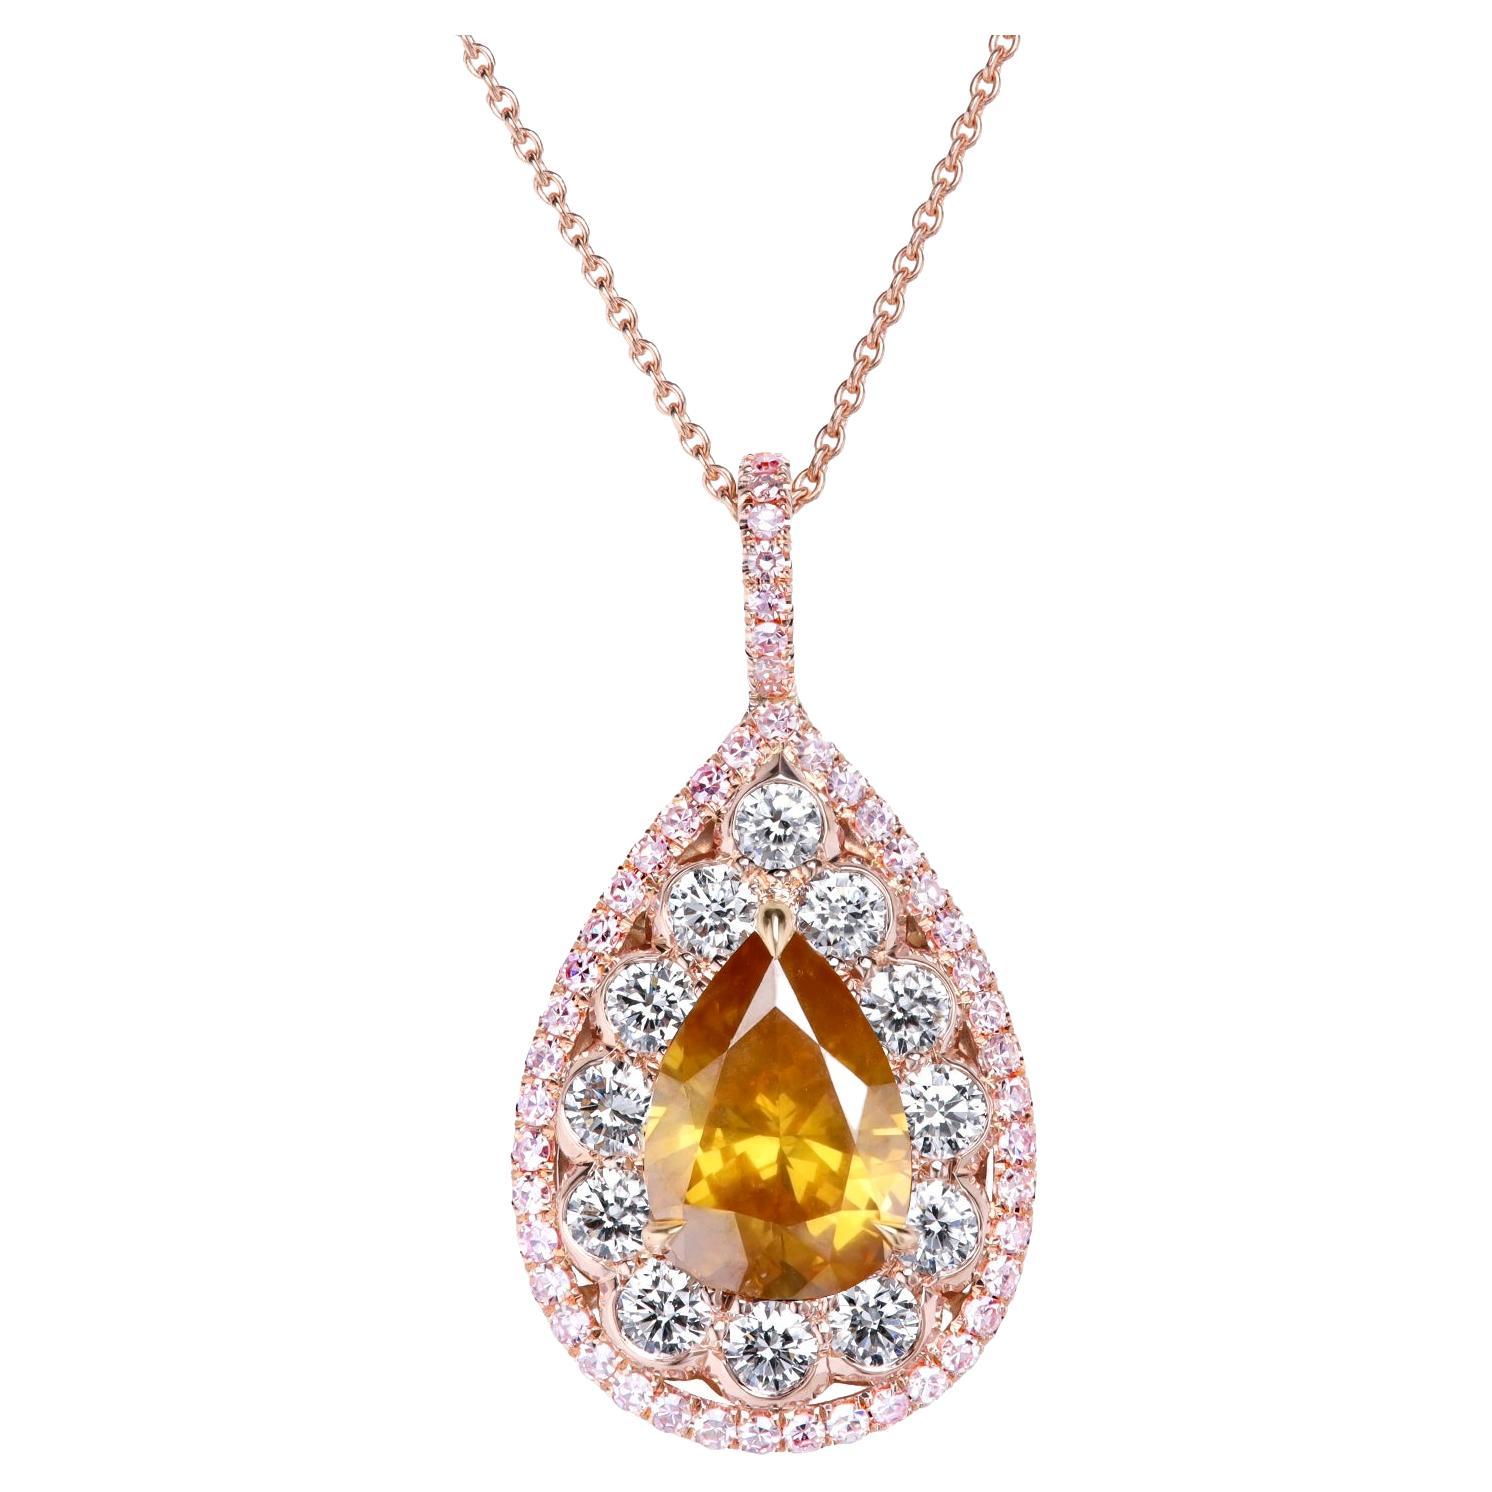 Leon Mege "Indian Summer" halo pendant in 18K rose gold with colored diamonds For Sale